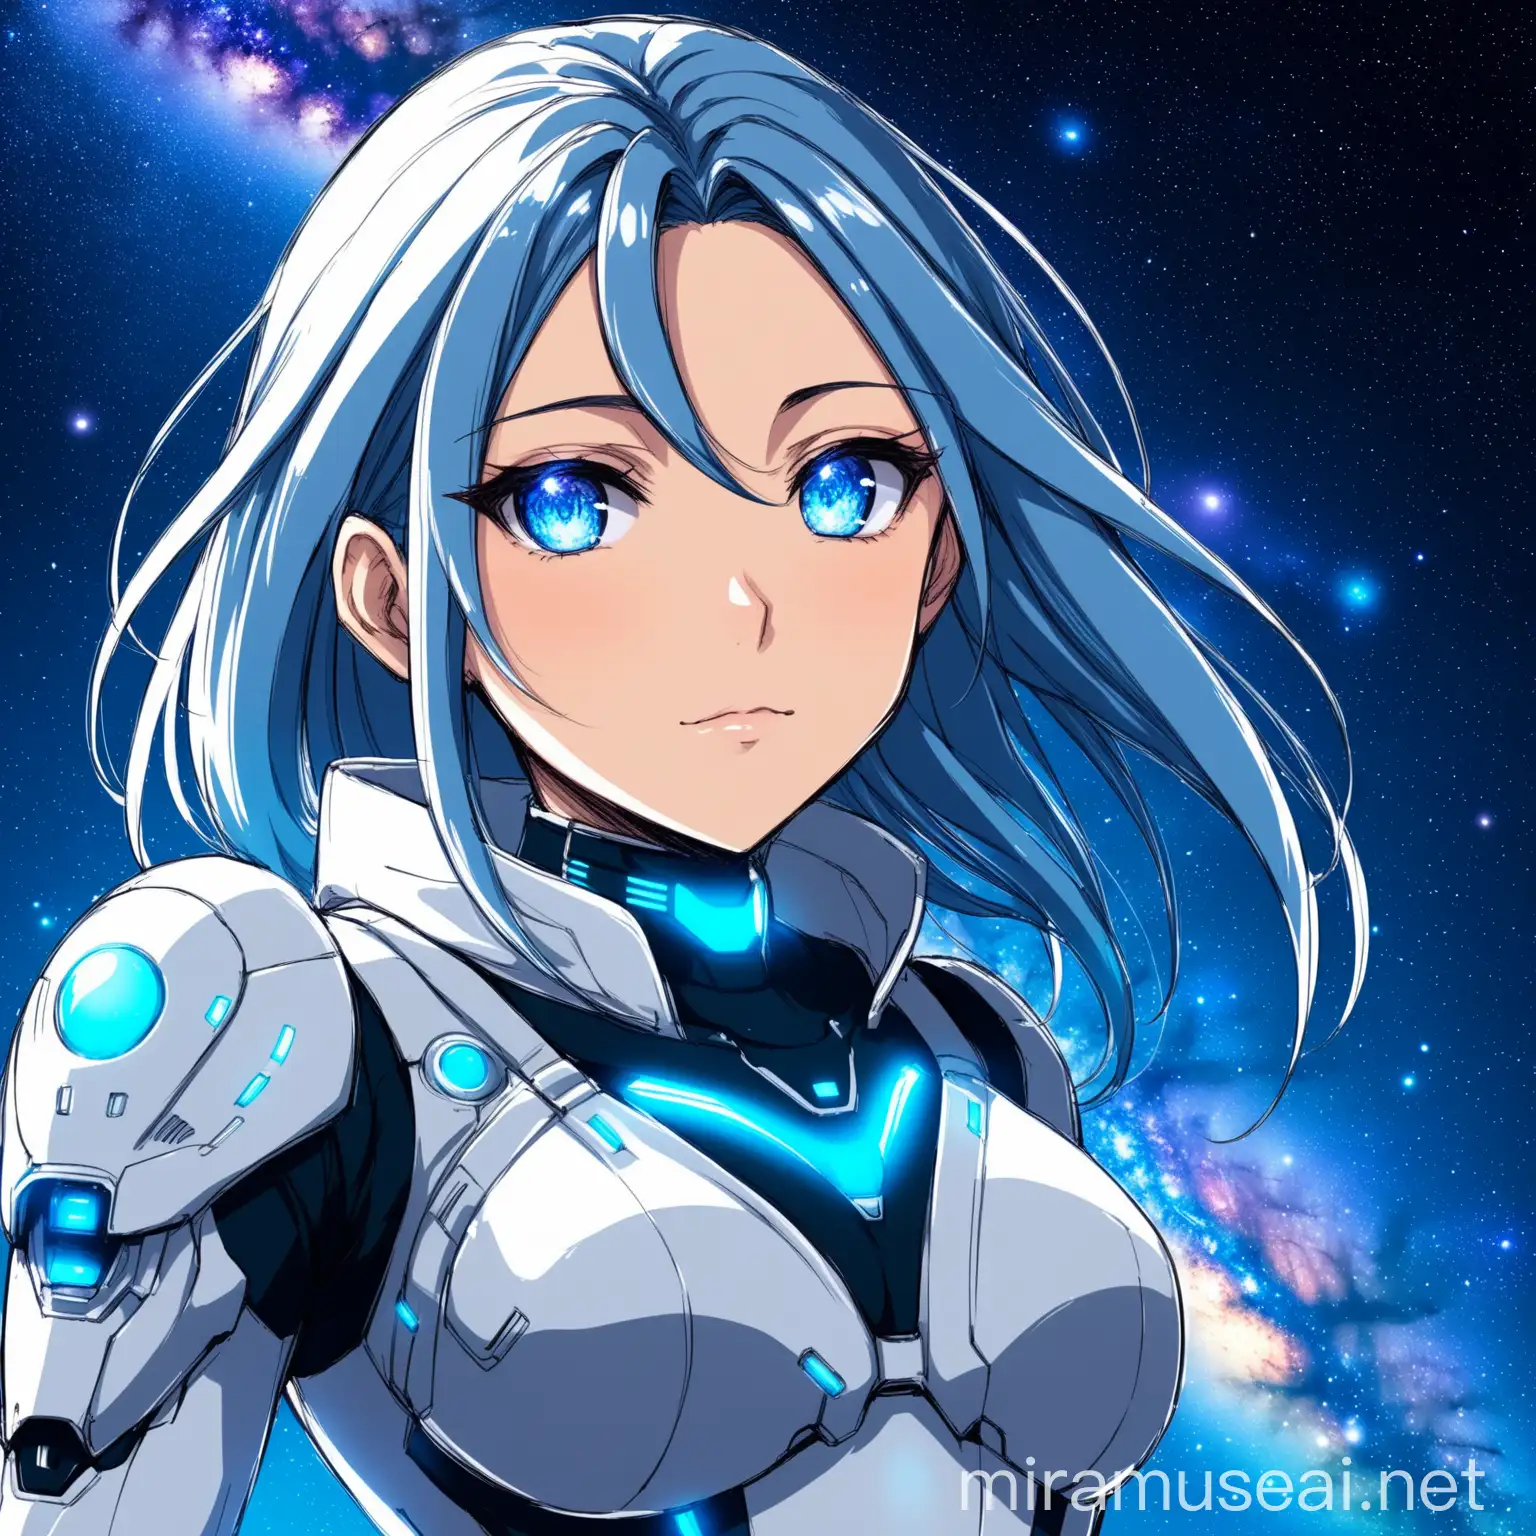 Milky Way galaxy humanization, anime style, Futuristic clothis, sexy but cold face